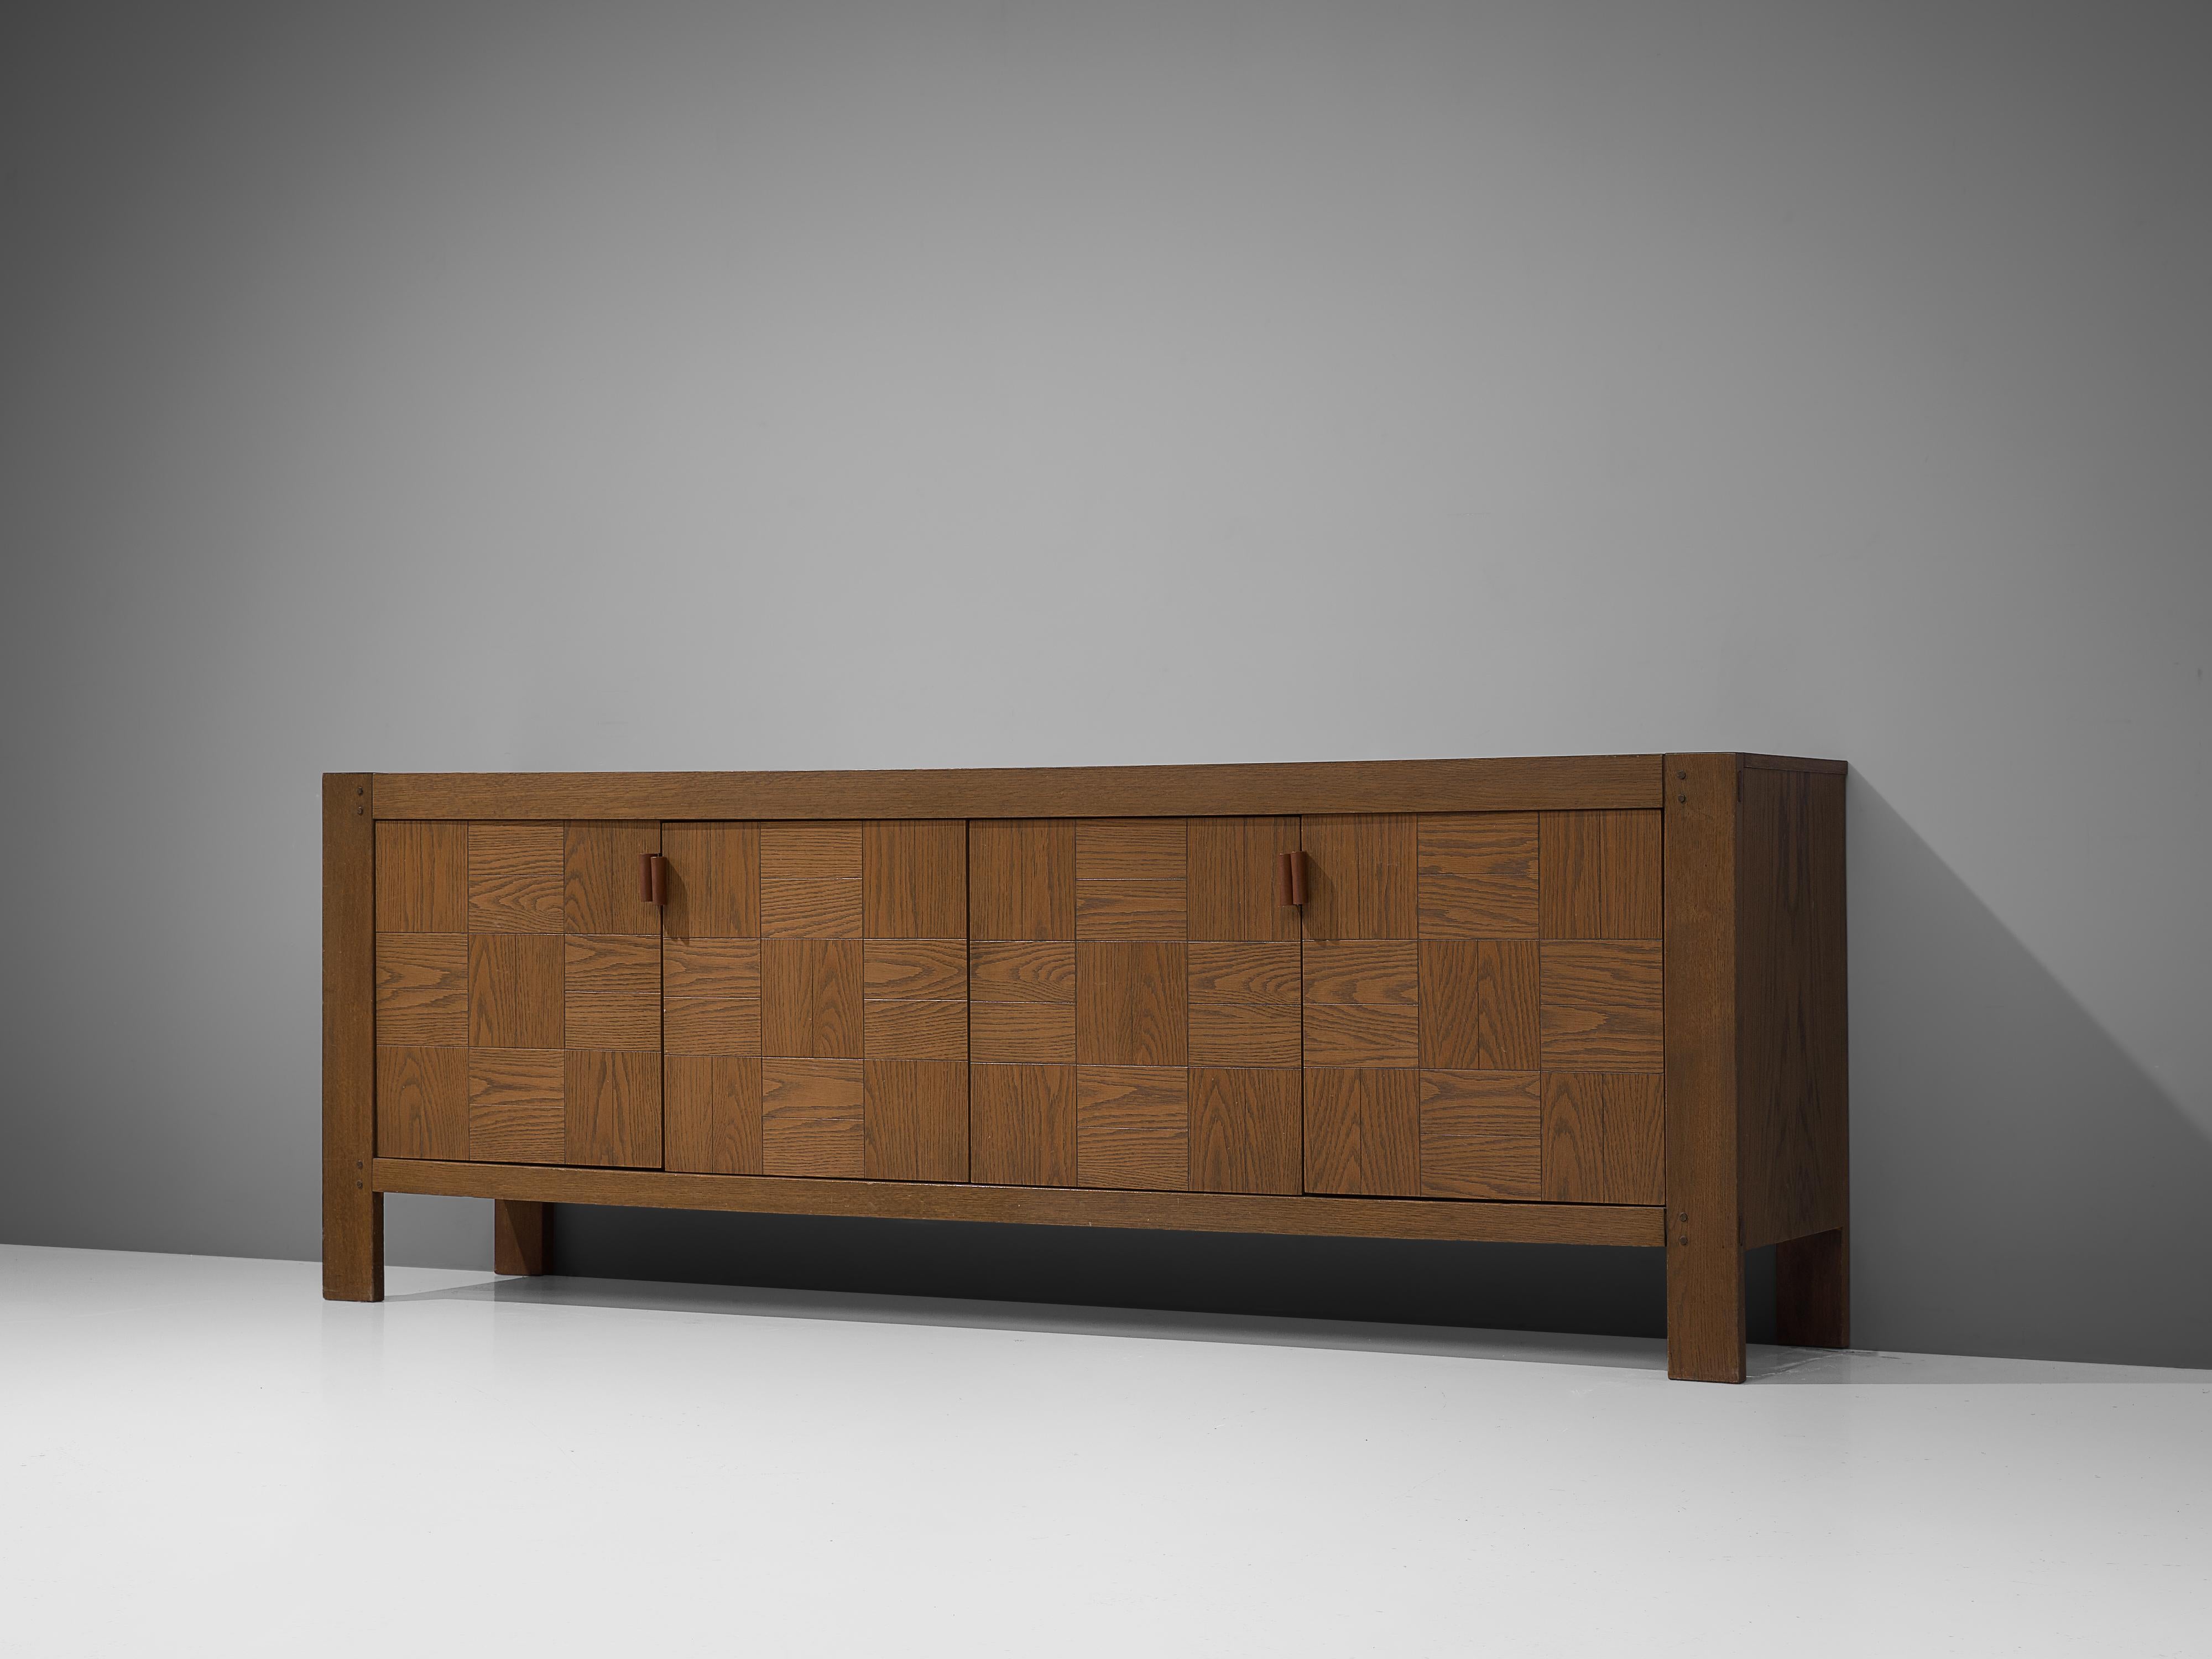 Sideboard, oak, leather, Belgium, 1970s

Warm colored sideboard executed in stained oak. This four-door sideboard features a beautiful front. Squared inlays of oak wood create a geometrical pattern. The natural grain creates a dynamic look. Brown